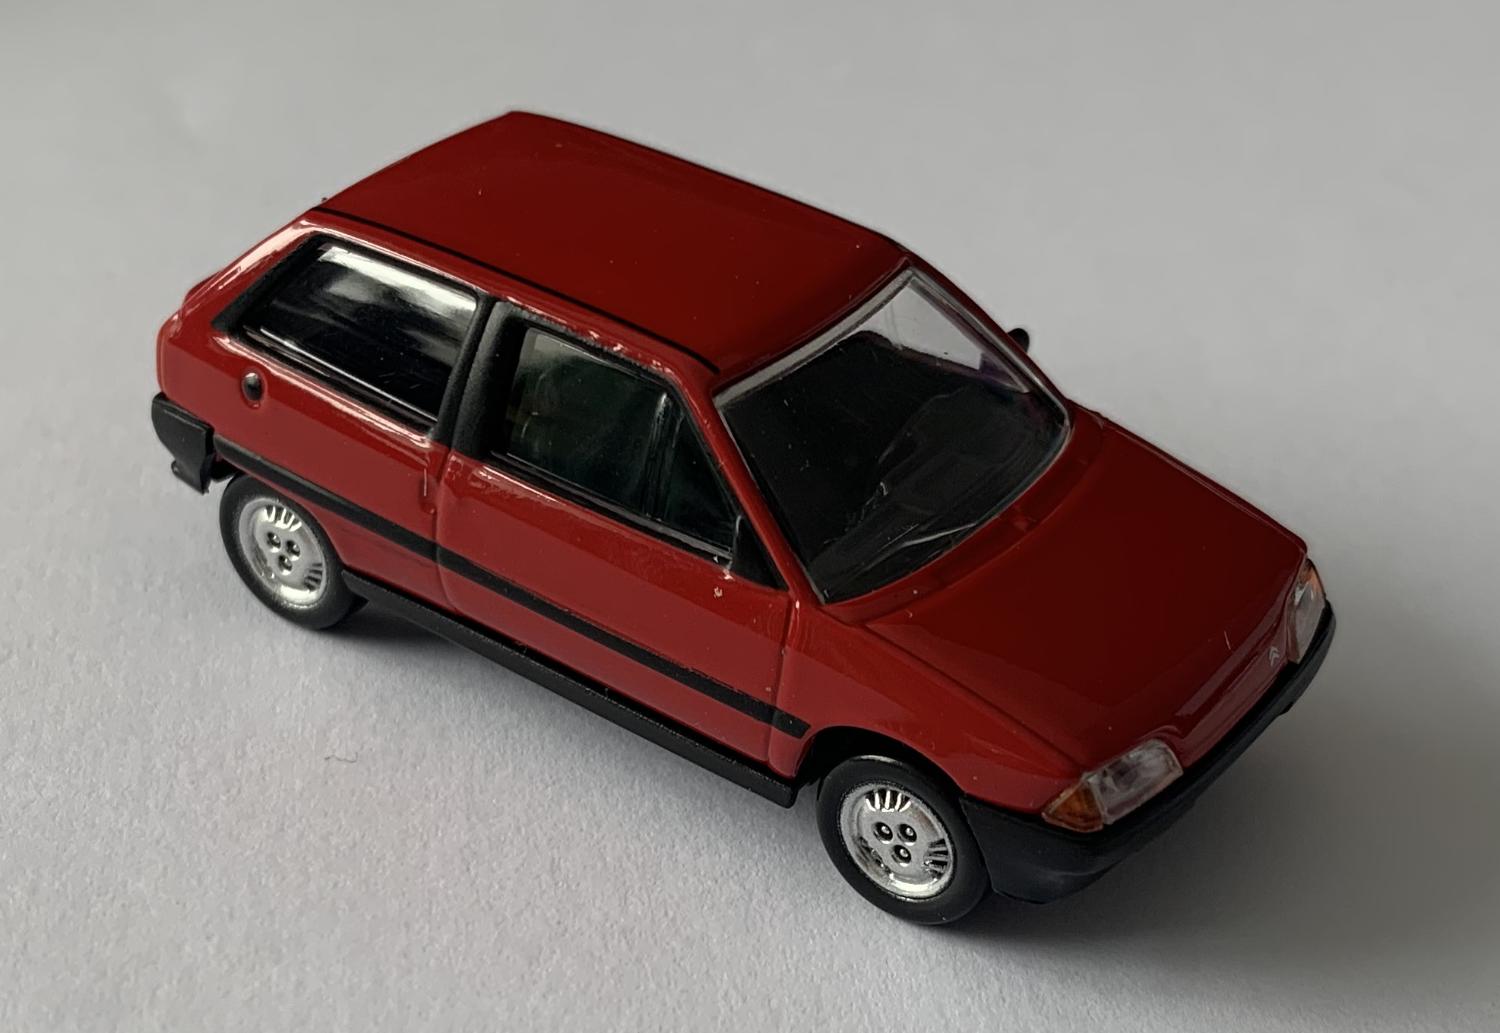 Citroen AX 1986 in red 1:64 scale model car from Norev, 310920